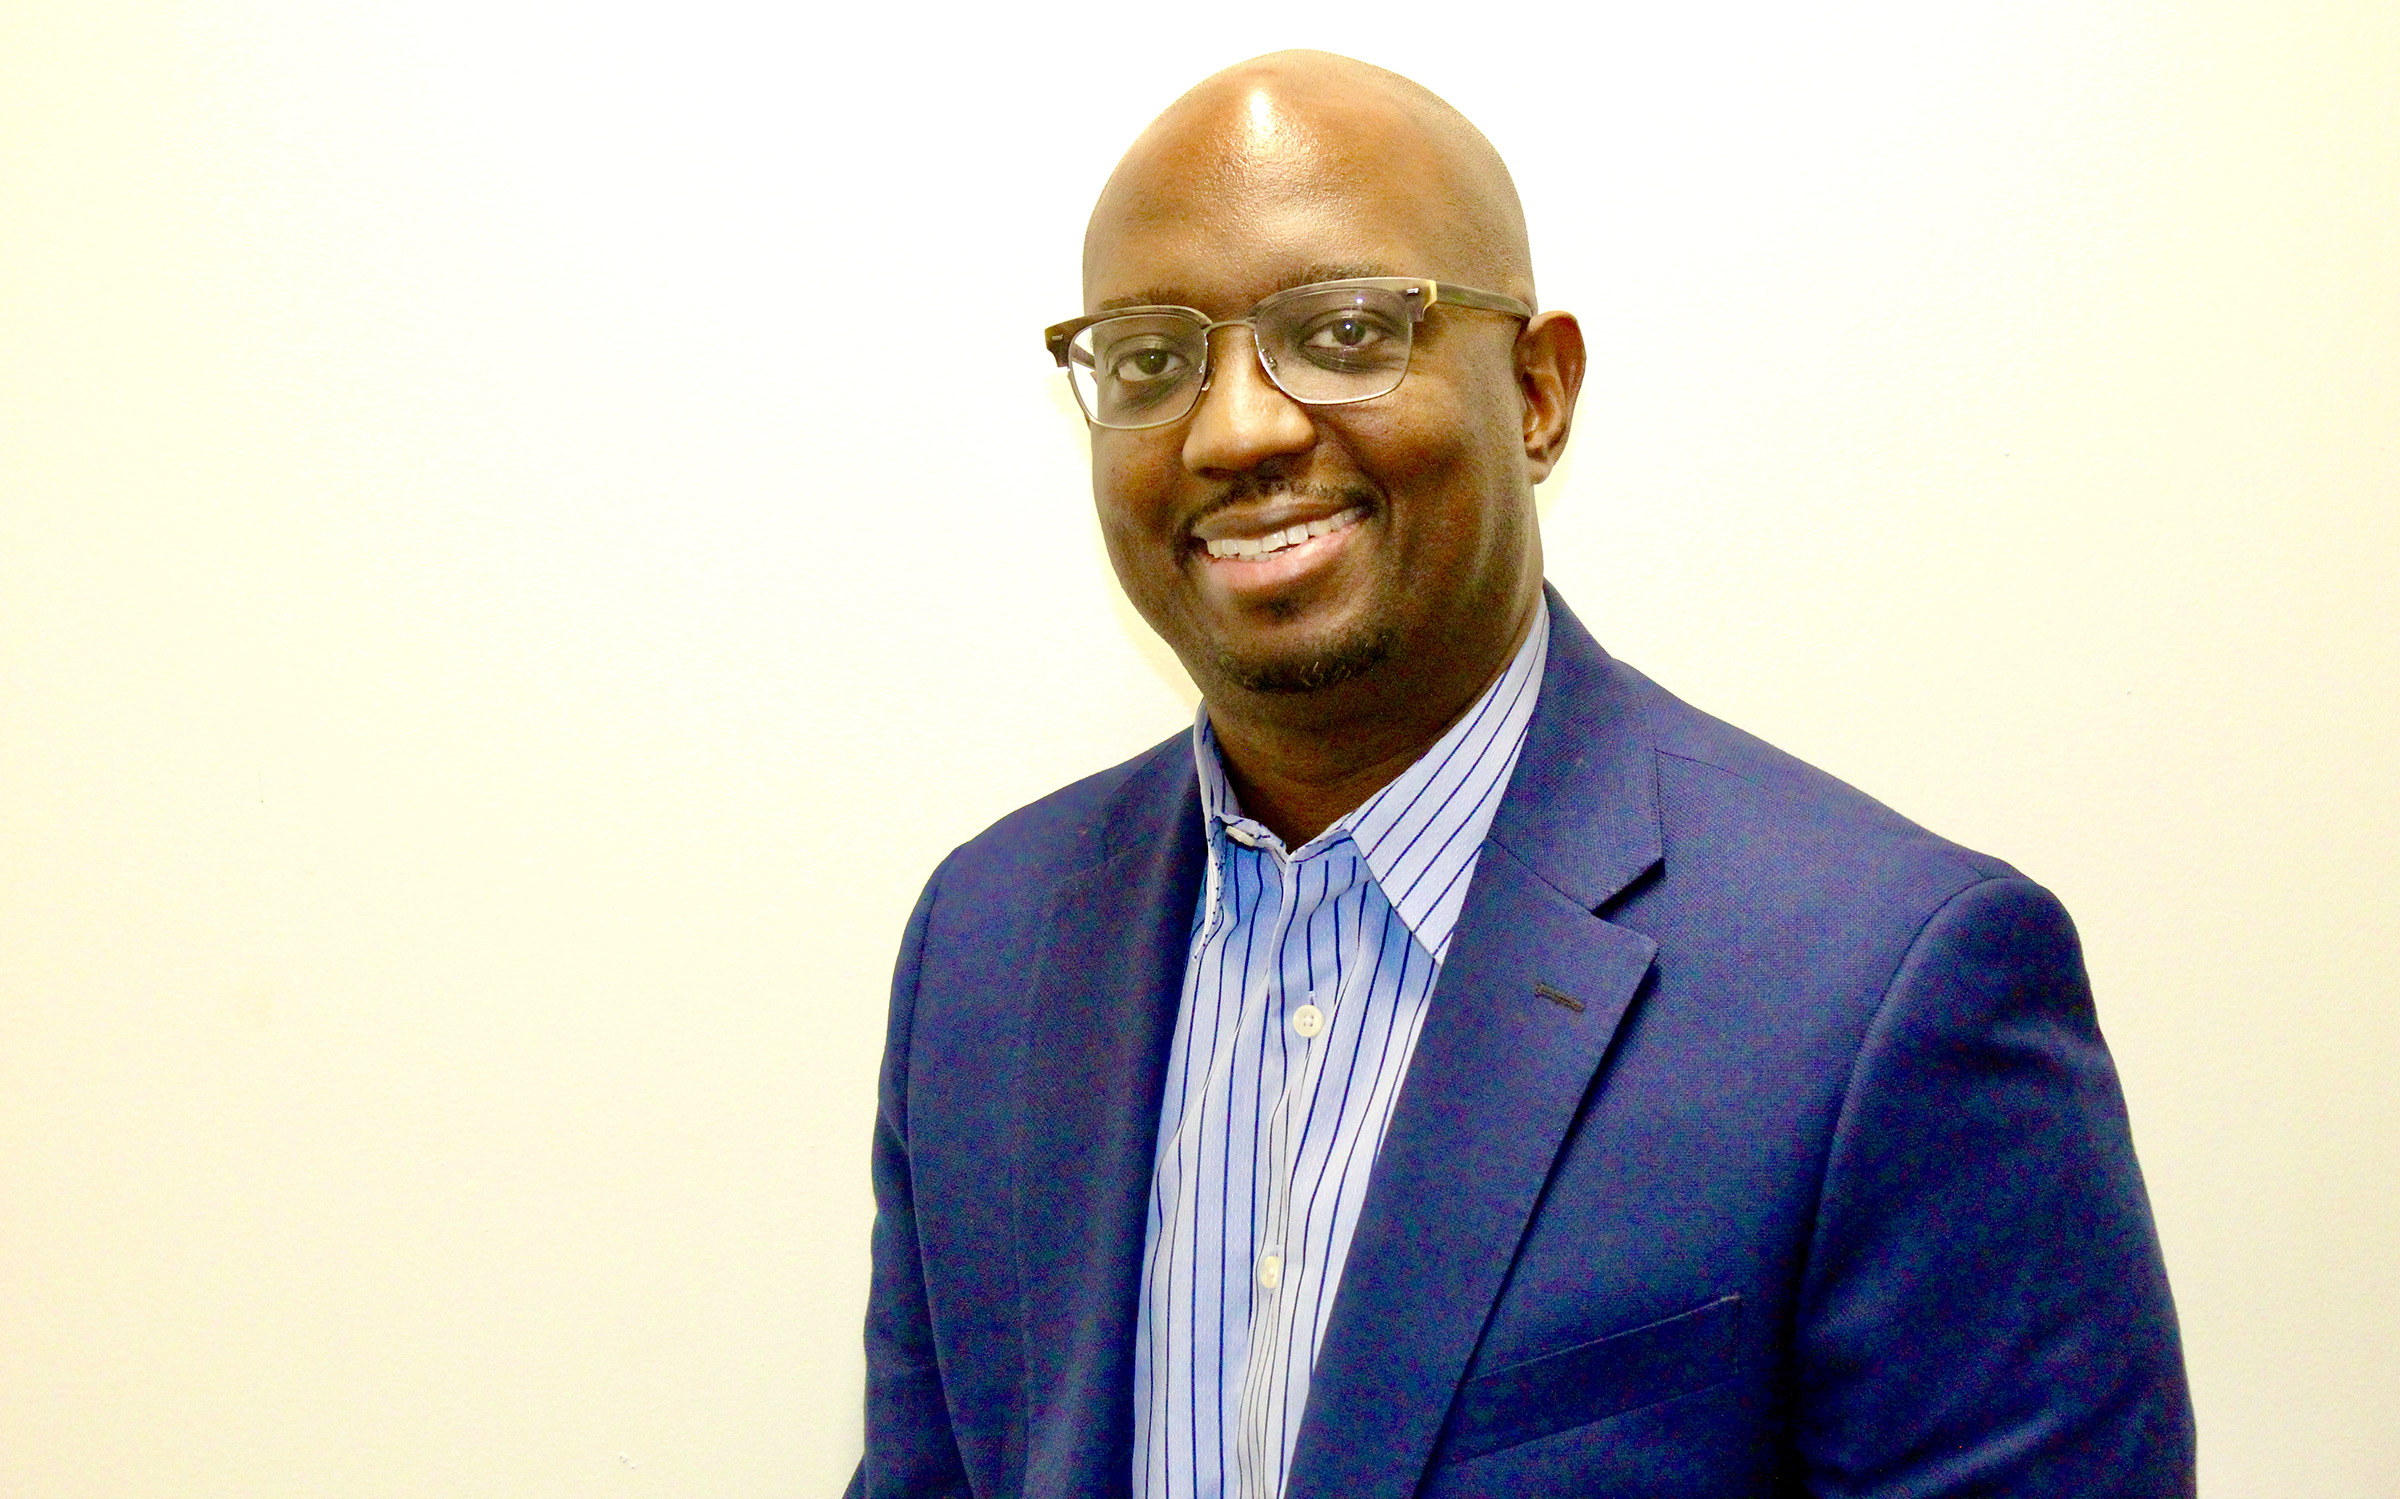 Malik Brown, President and CEO of Graduate! Philadelphia, will be the keynote speaker at the University College Graduation Ceremony on Friday, May 12.